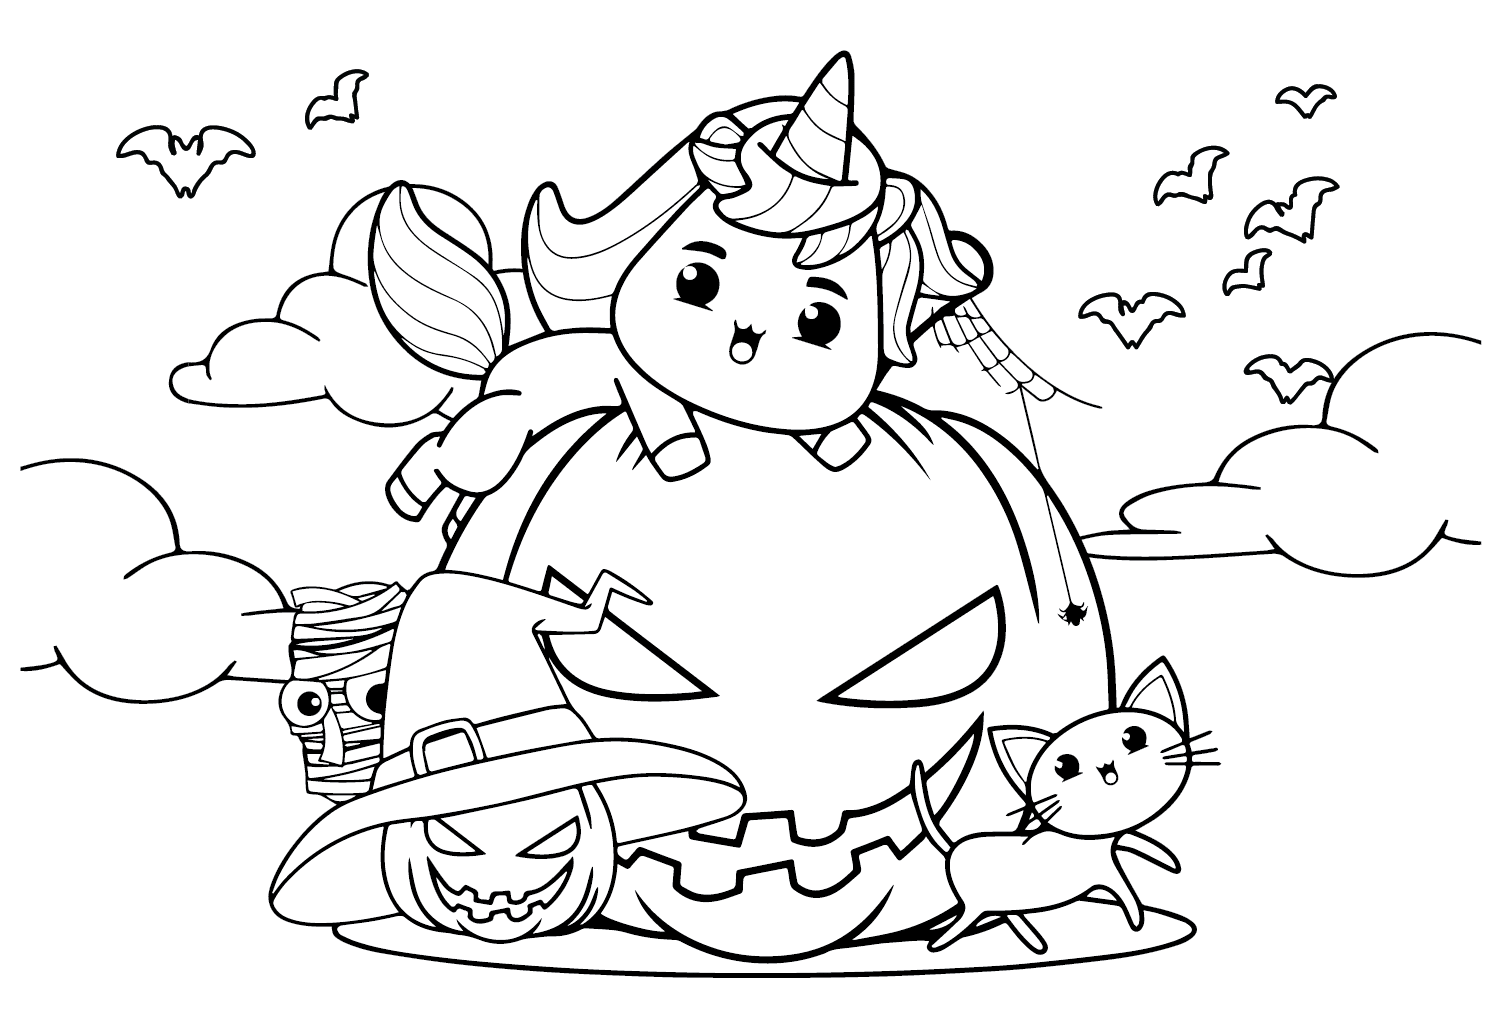 Halloween Unicorn and Pumpkin Coloring Page